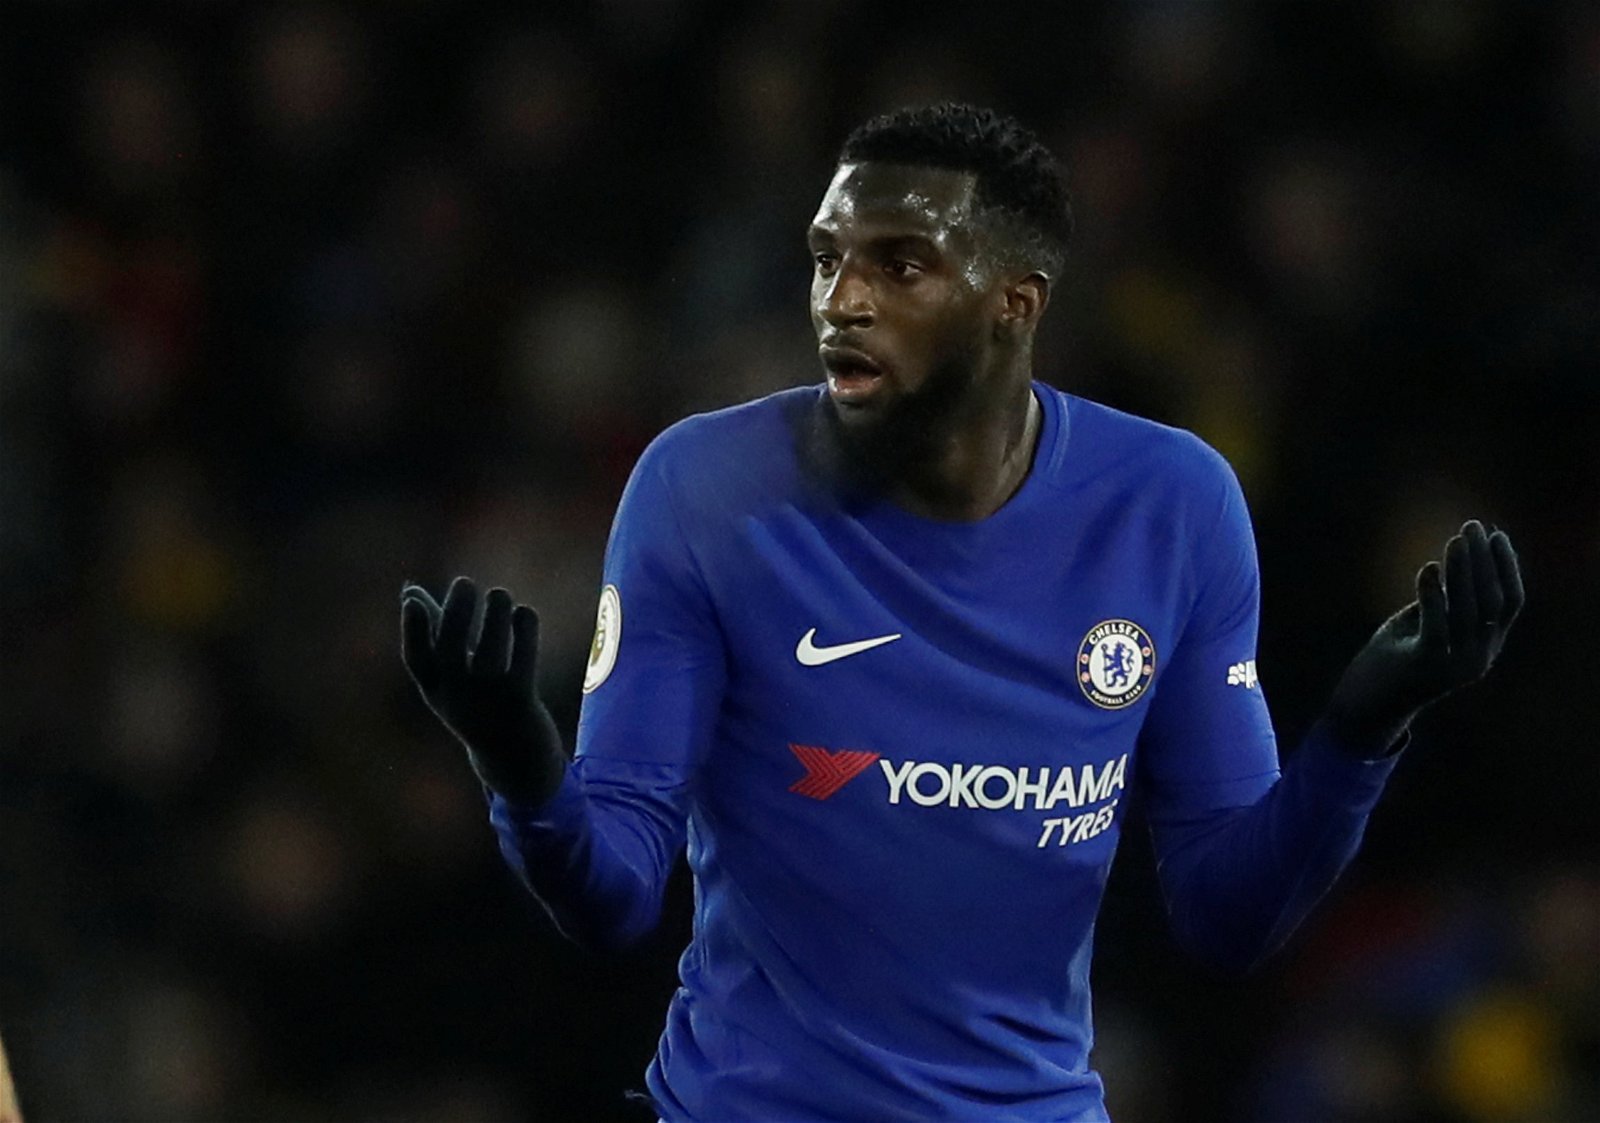 Top 10 most disappointing Premier League players this season Tiemoue Bakayoko